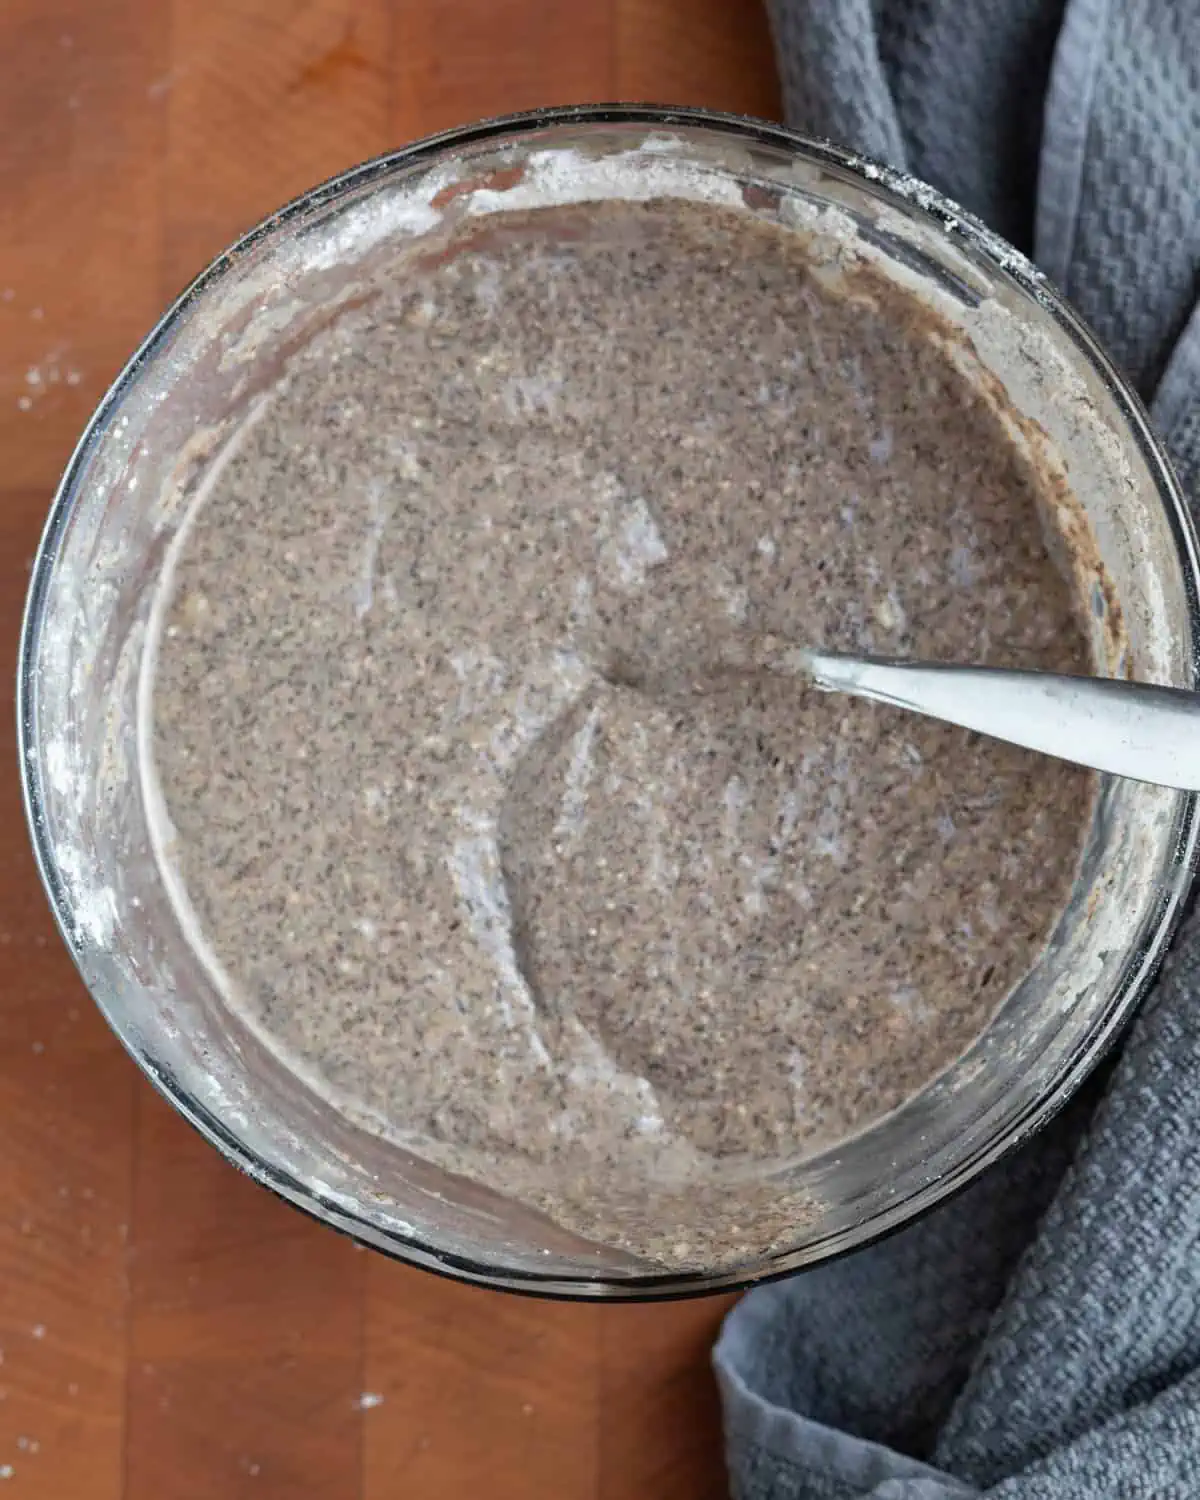 Image of a bowl of buckwheat pancake batter to show the consistency.